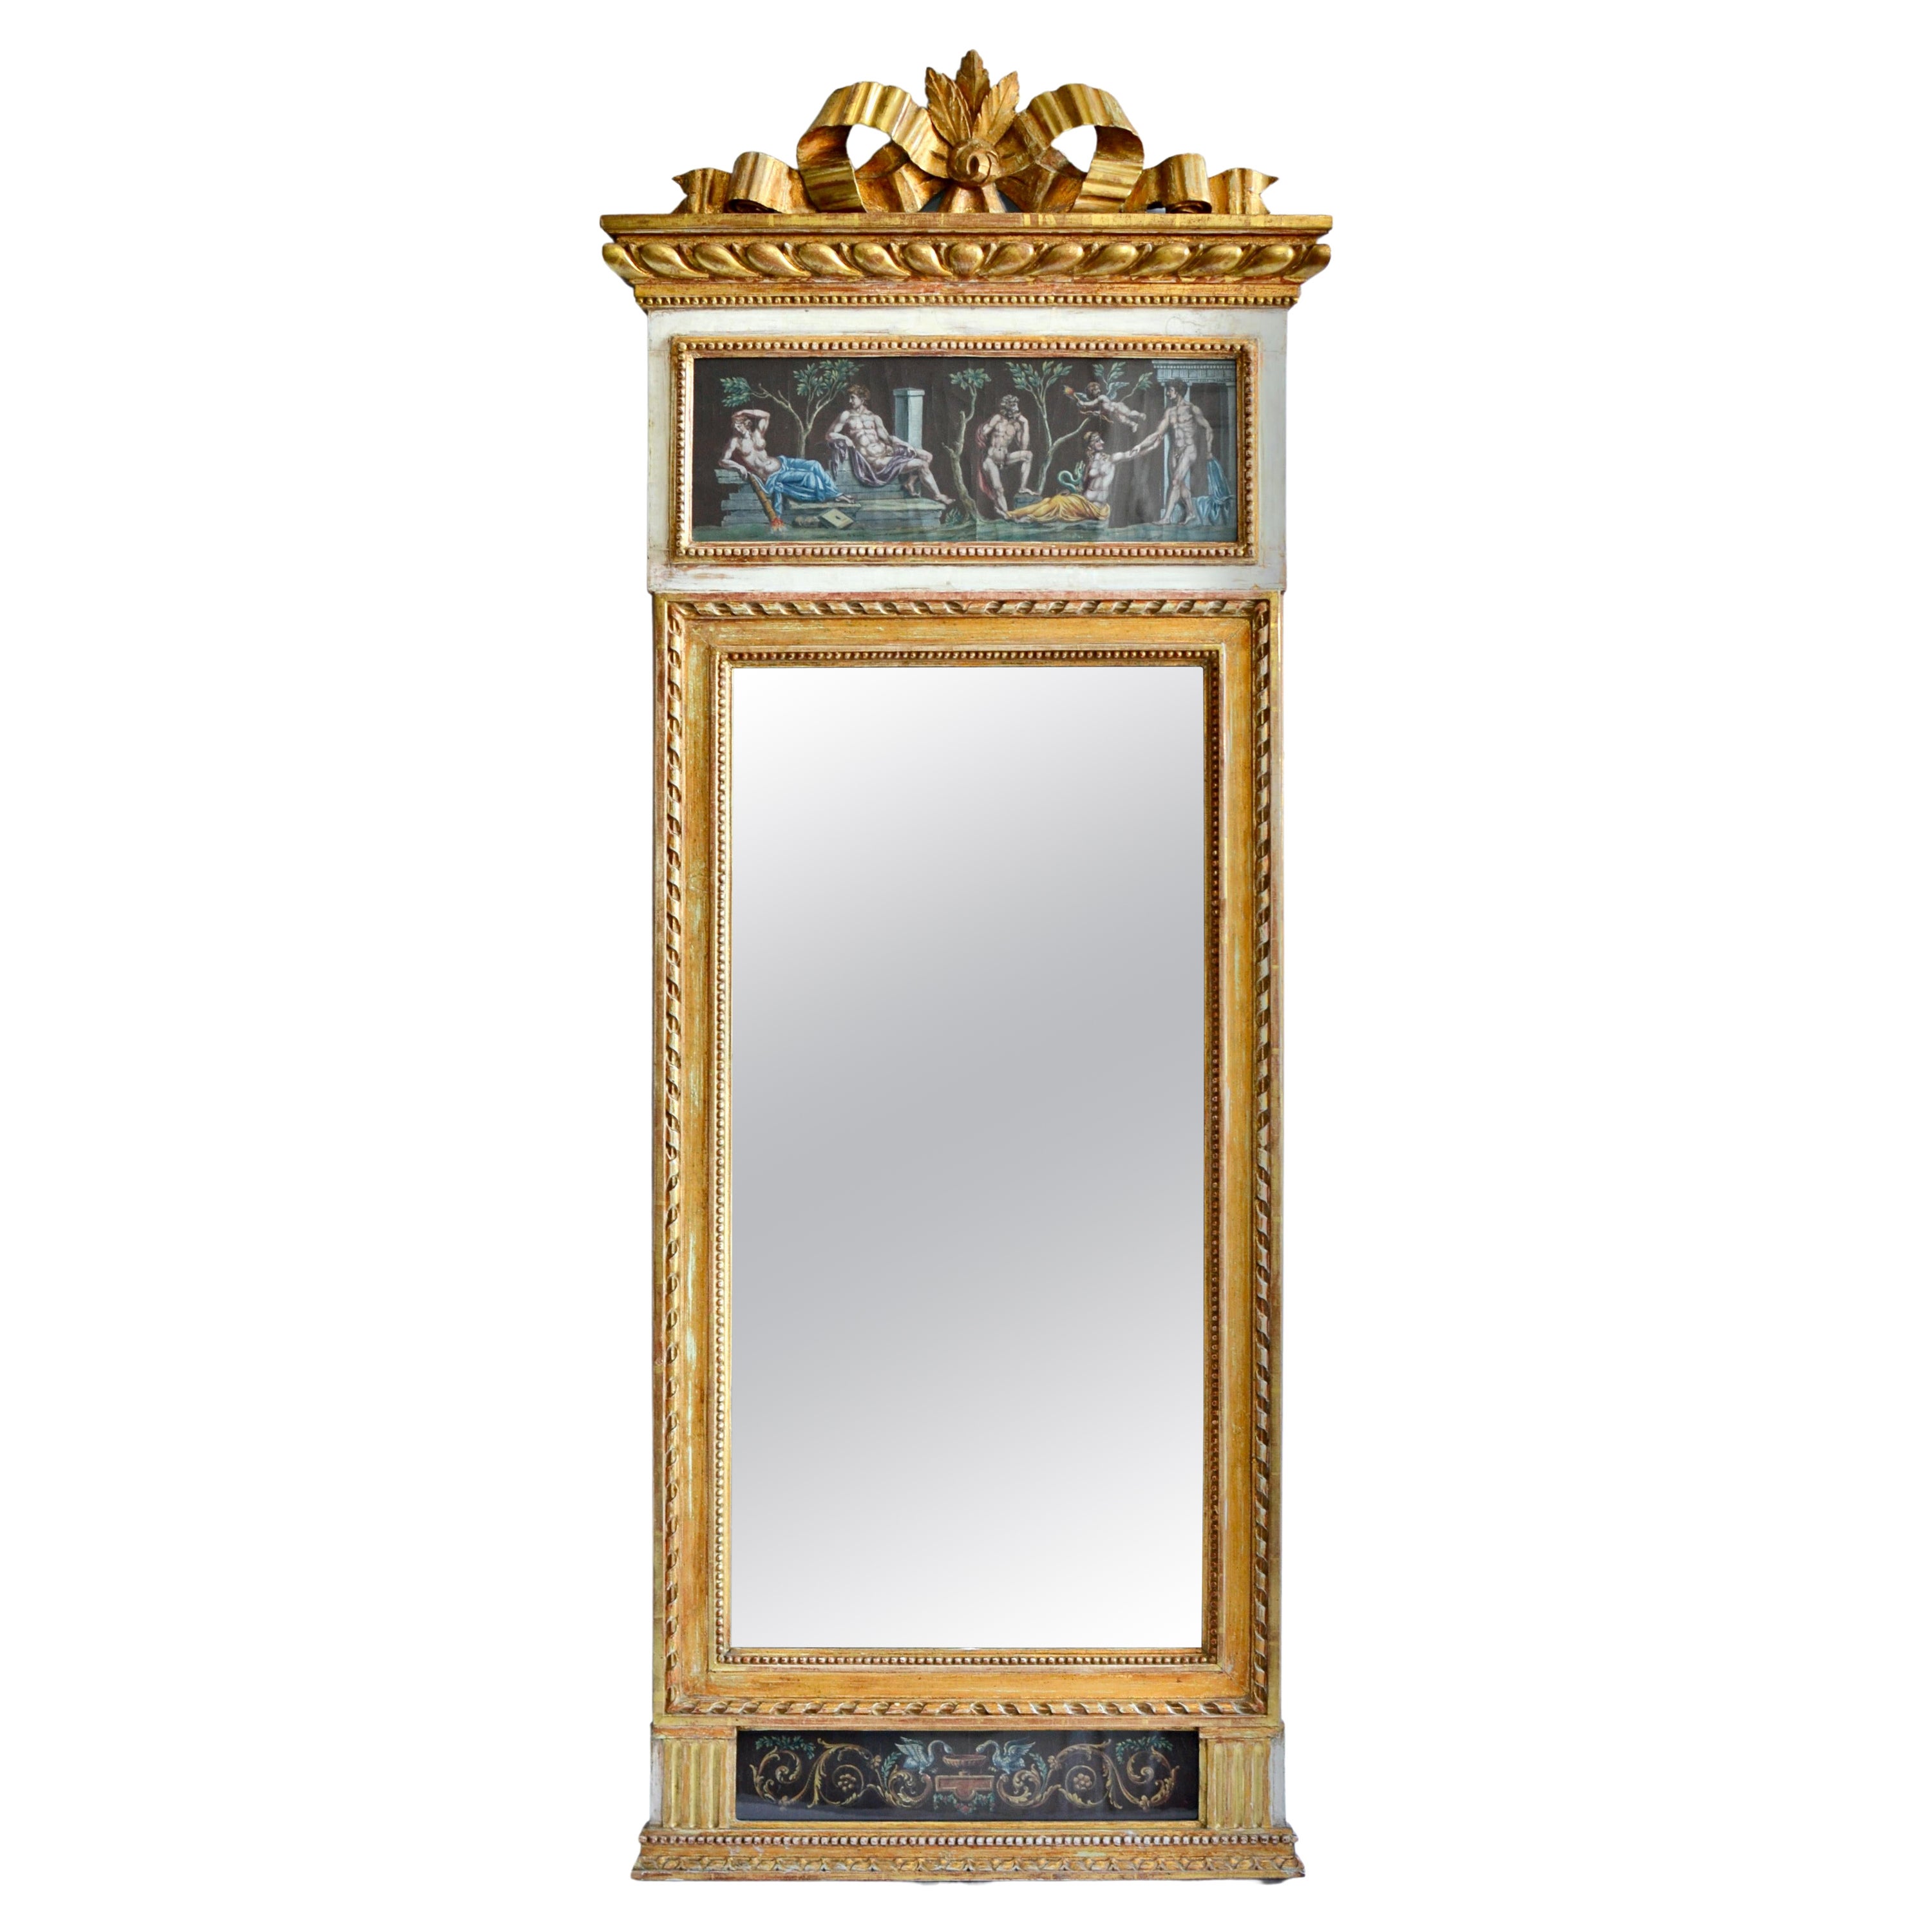 Gustavian 18th Century Giltwood Mirror with Gouaches